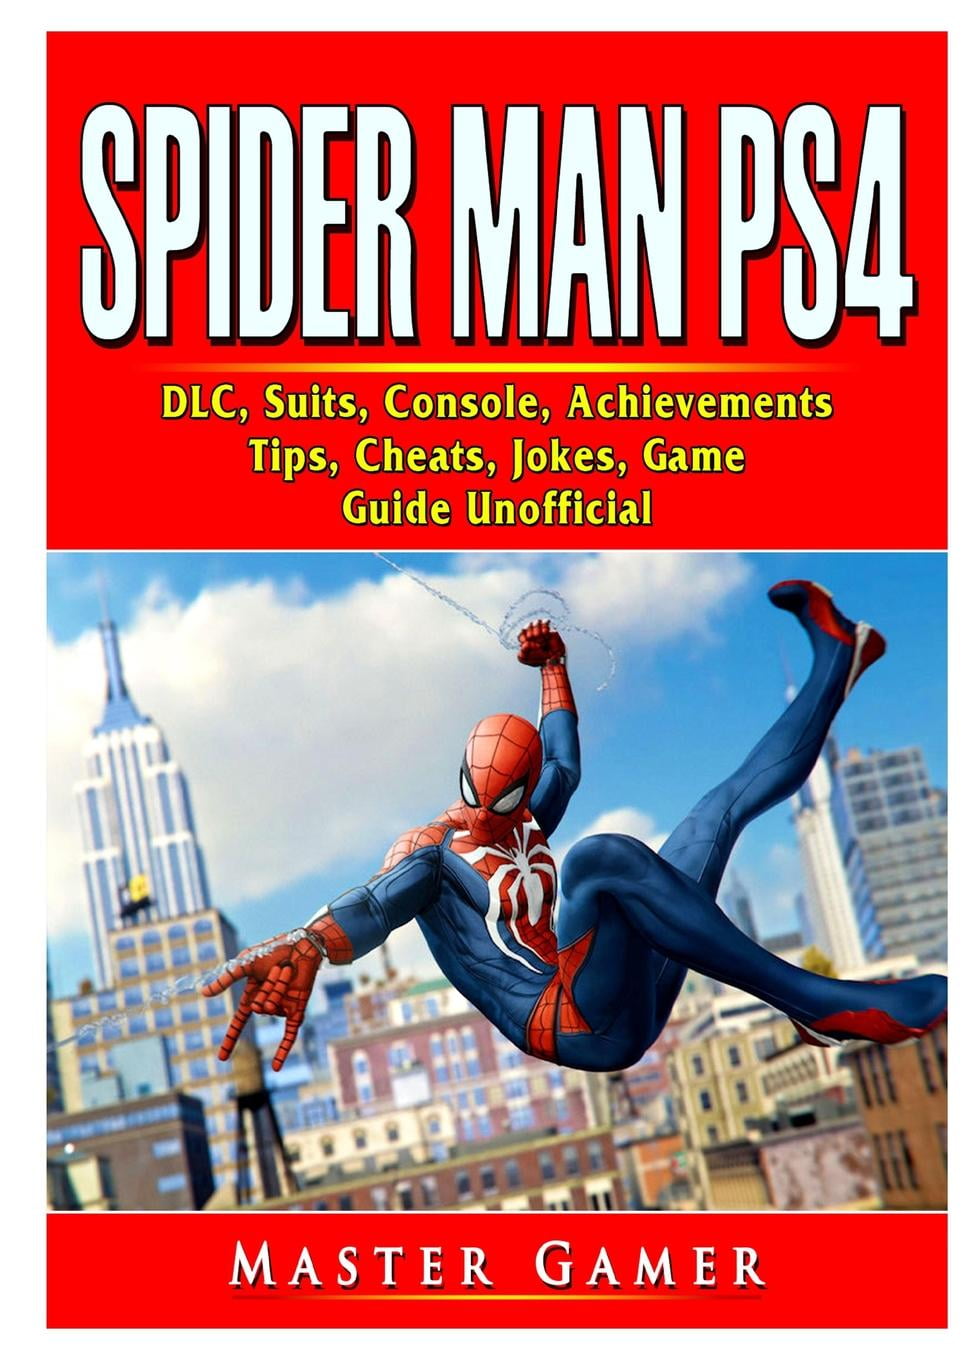 Spider Man PS4, DLC, Suits, Achievements, Tips, Cheats, Game Guide Unofficial (Paperback) -